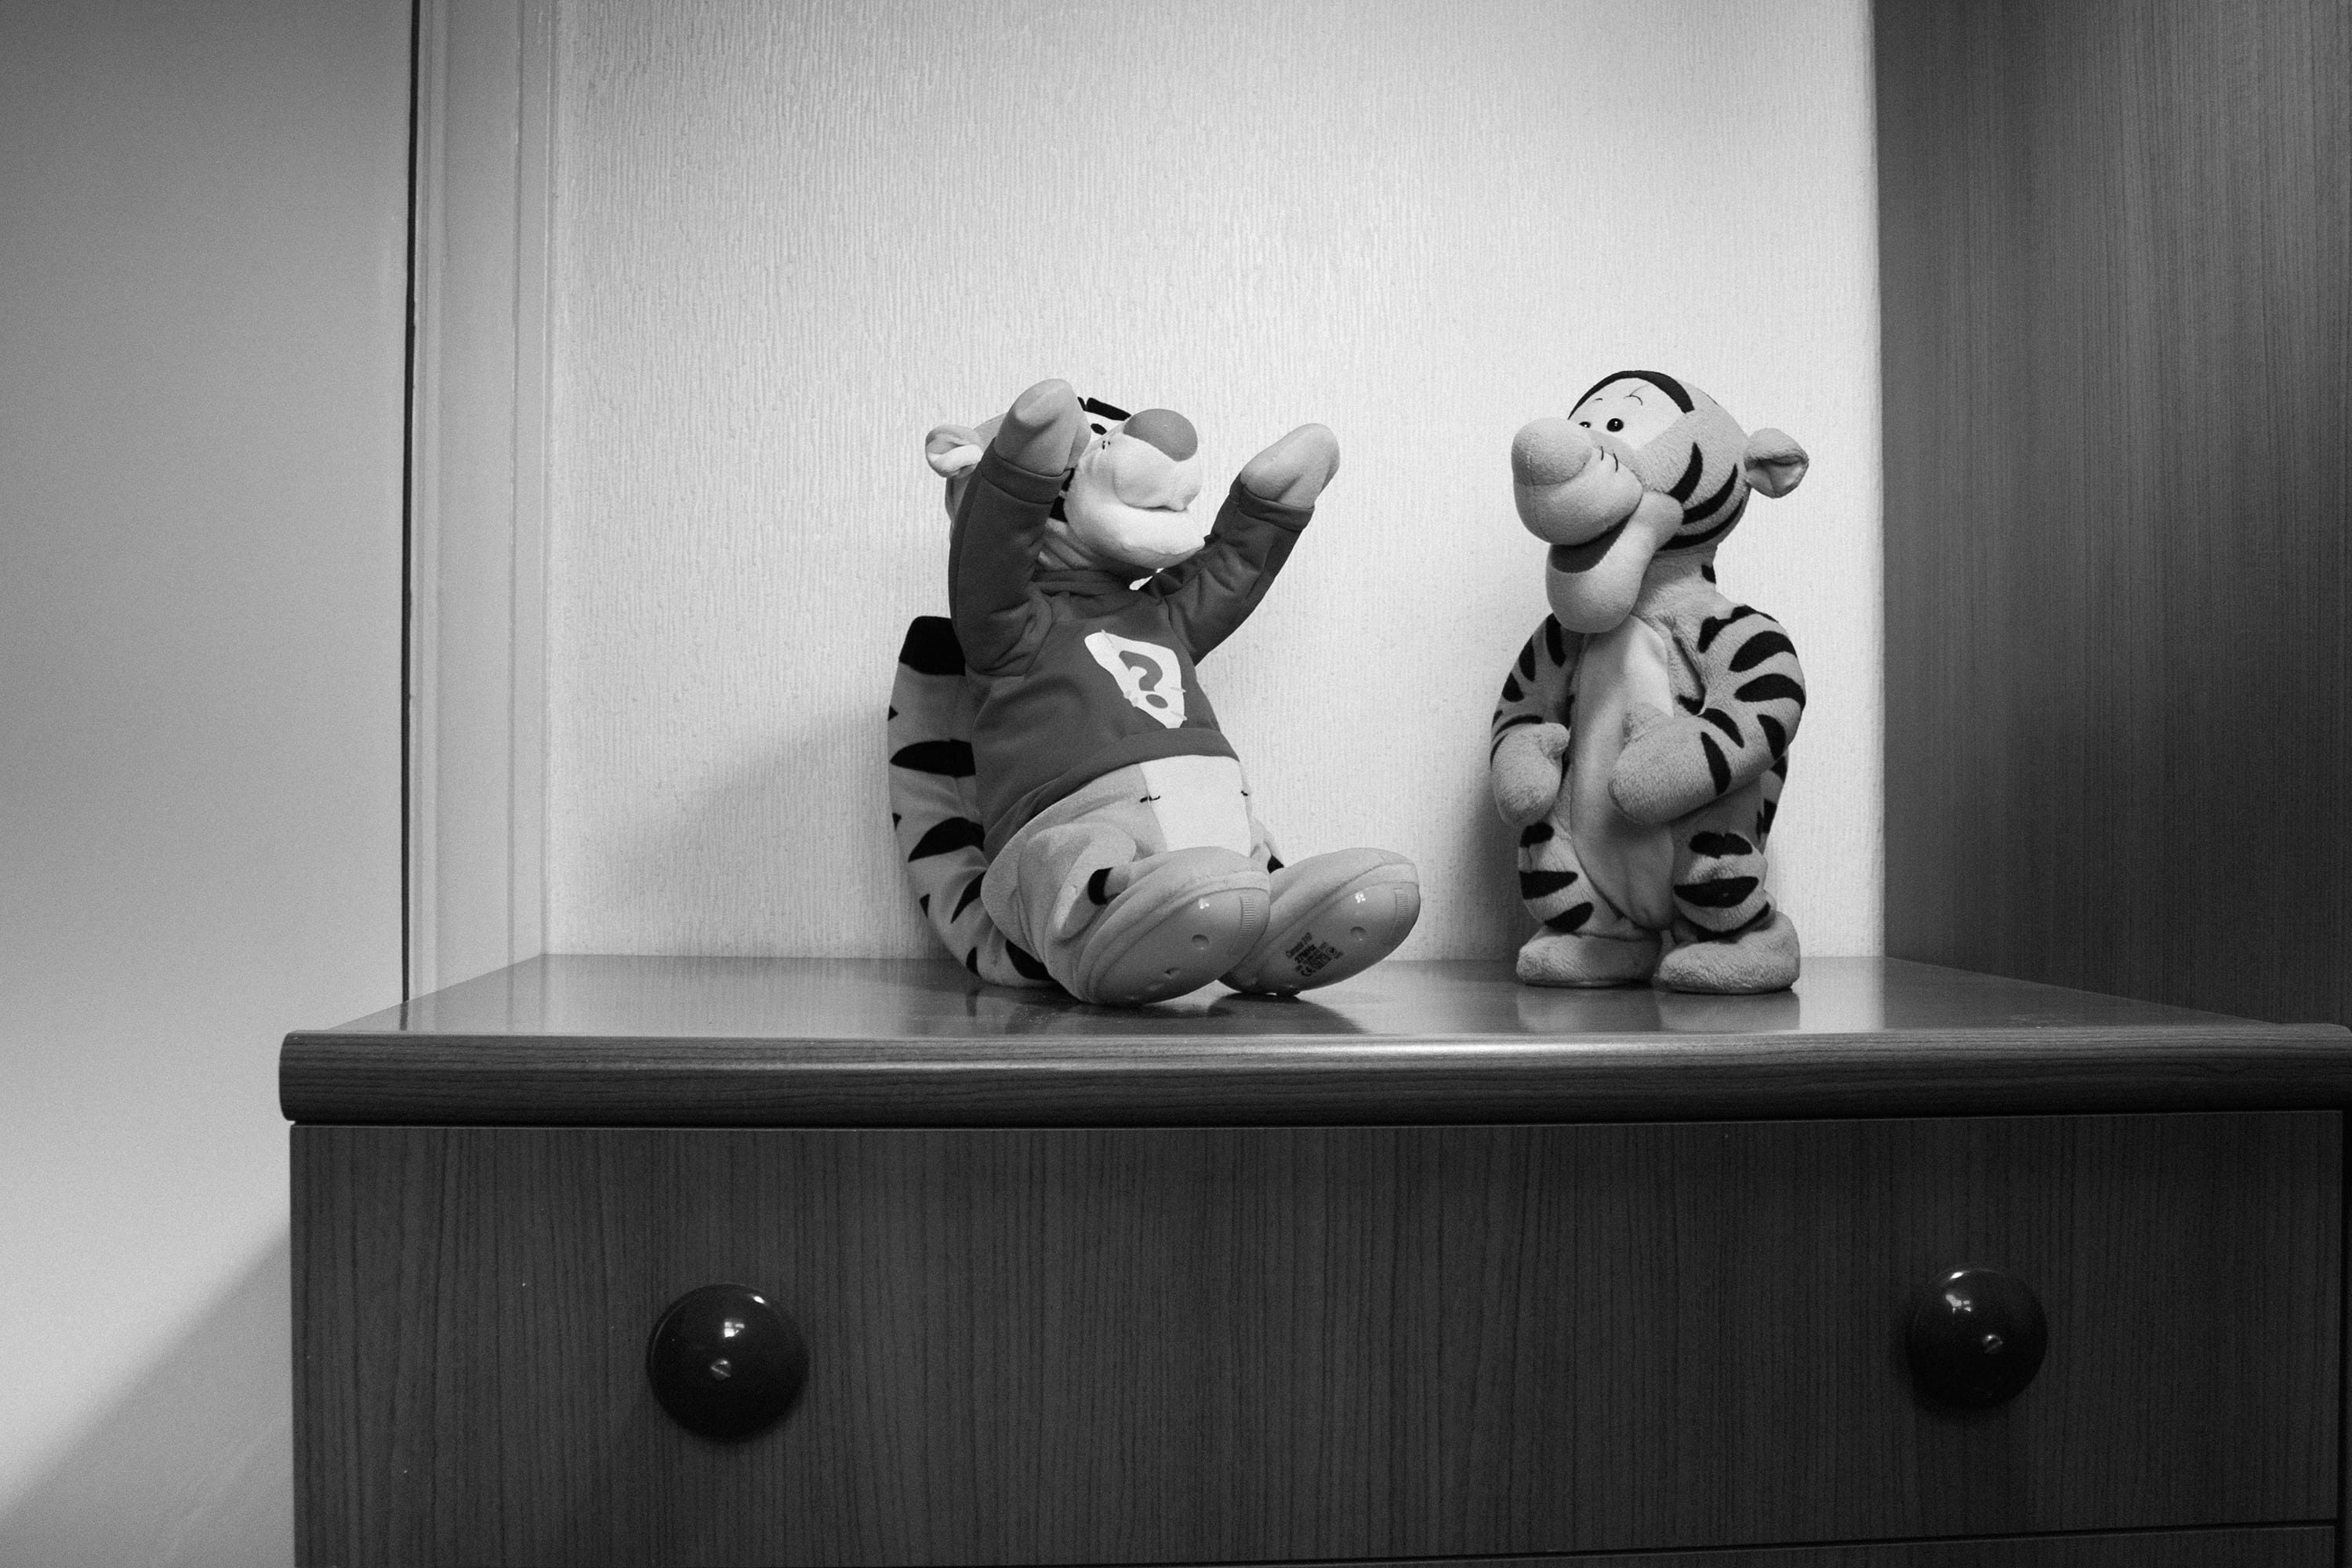 Black and white photograph of two plush Tigger toys.